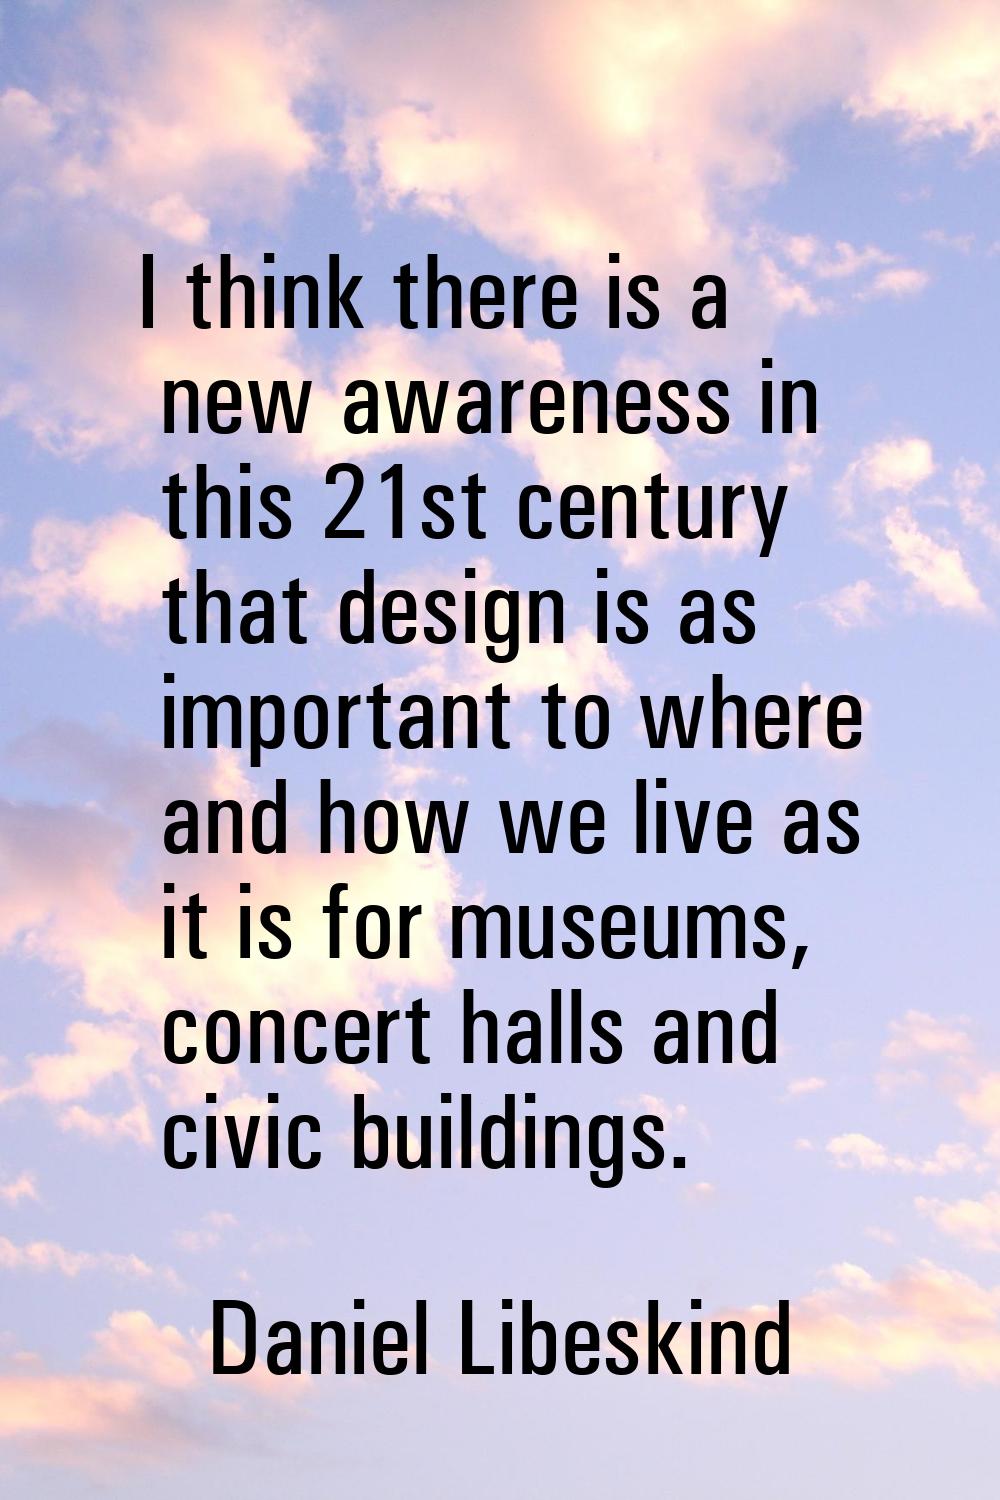 I think there is a new awareness in this 21st century that design is as important to where and how 